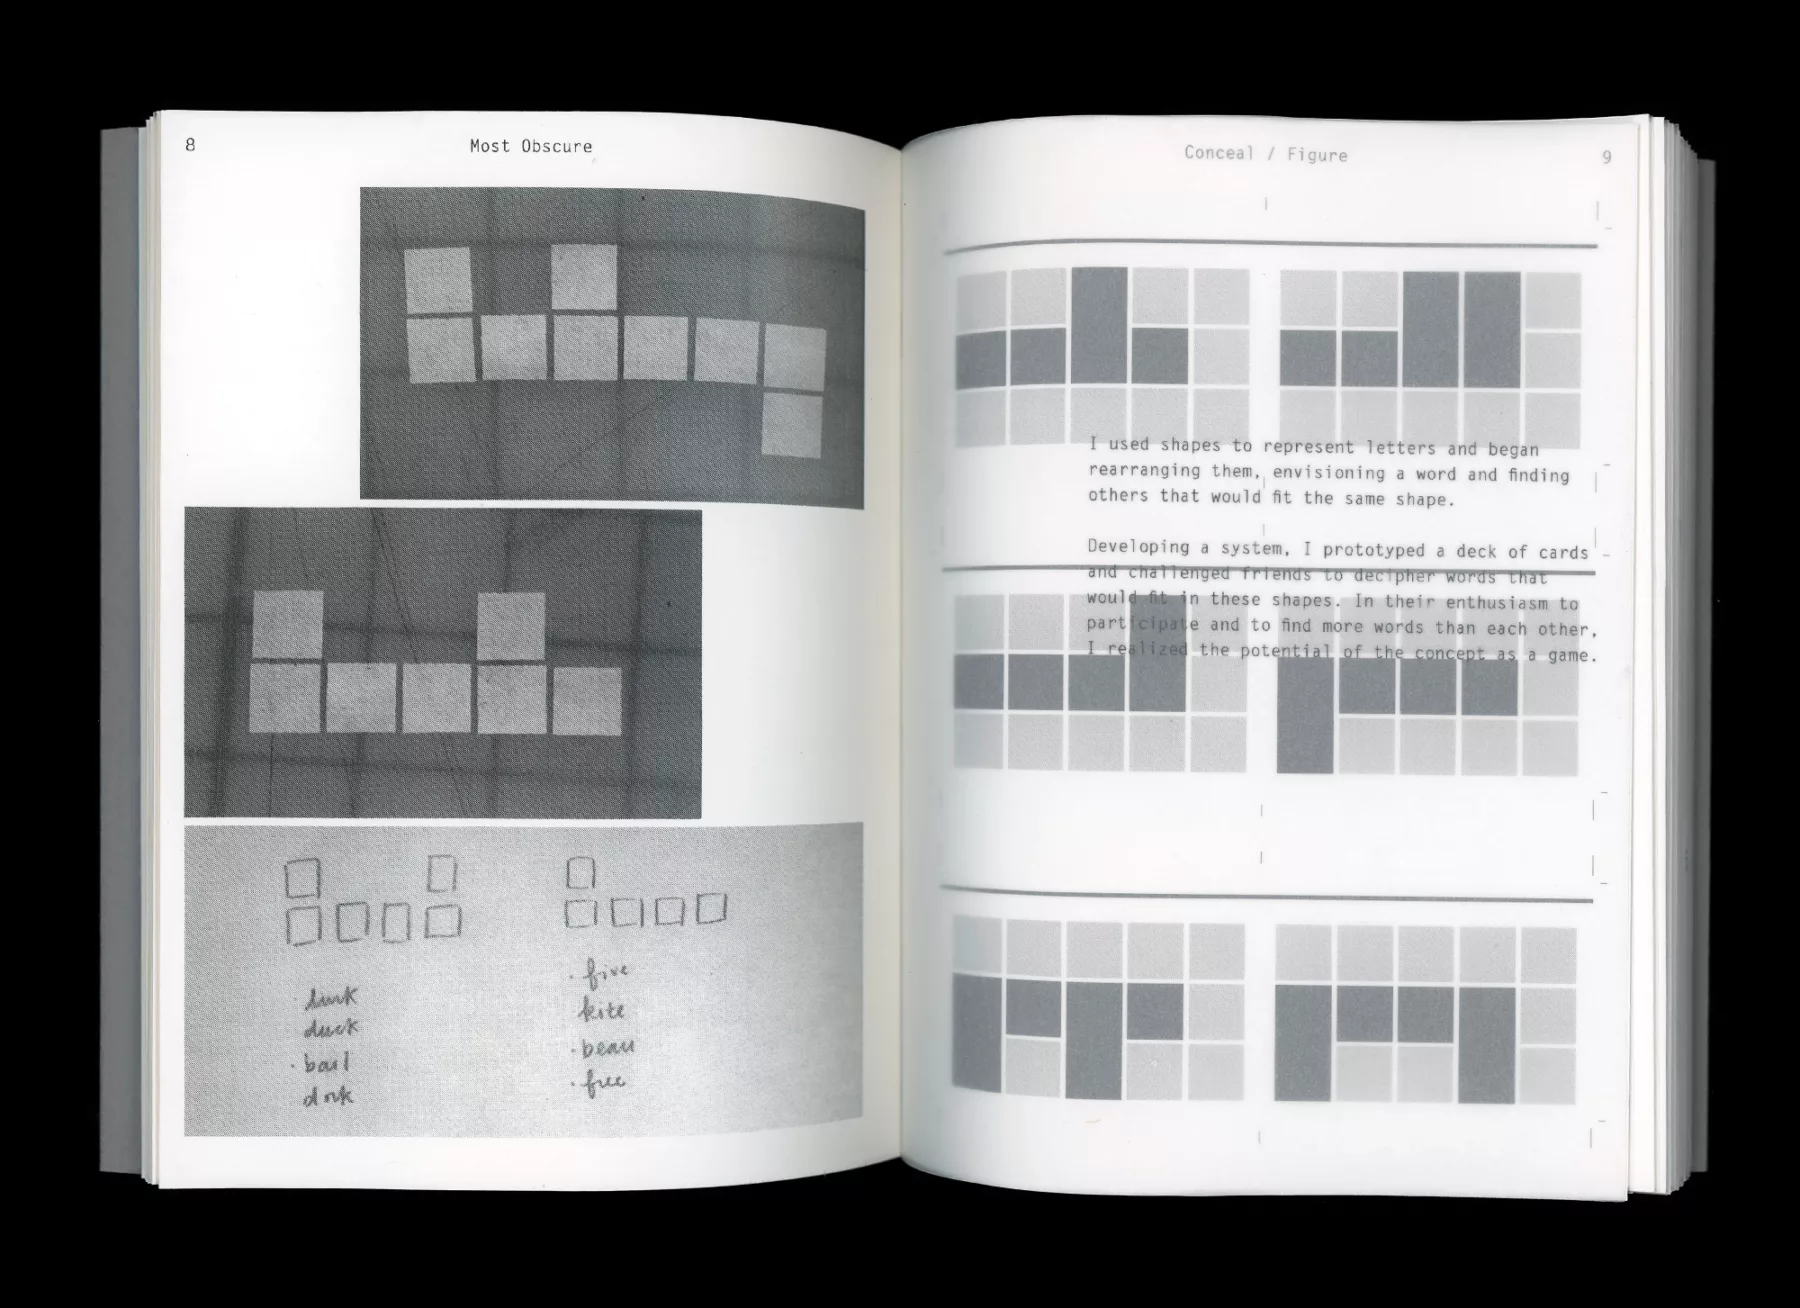 Spread of 'Most Obscure' book showing a system by which letters are blocked out according to letter height.